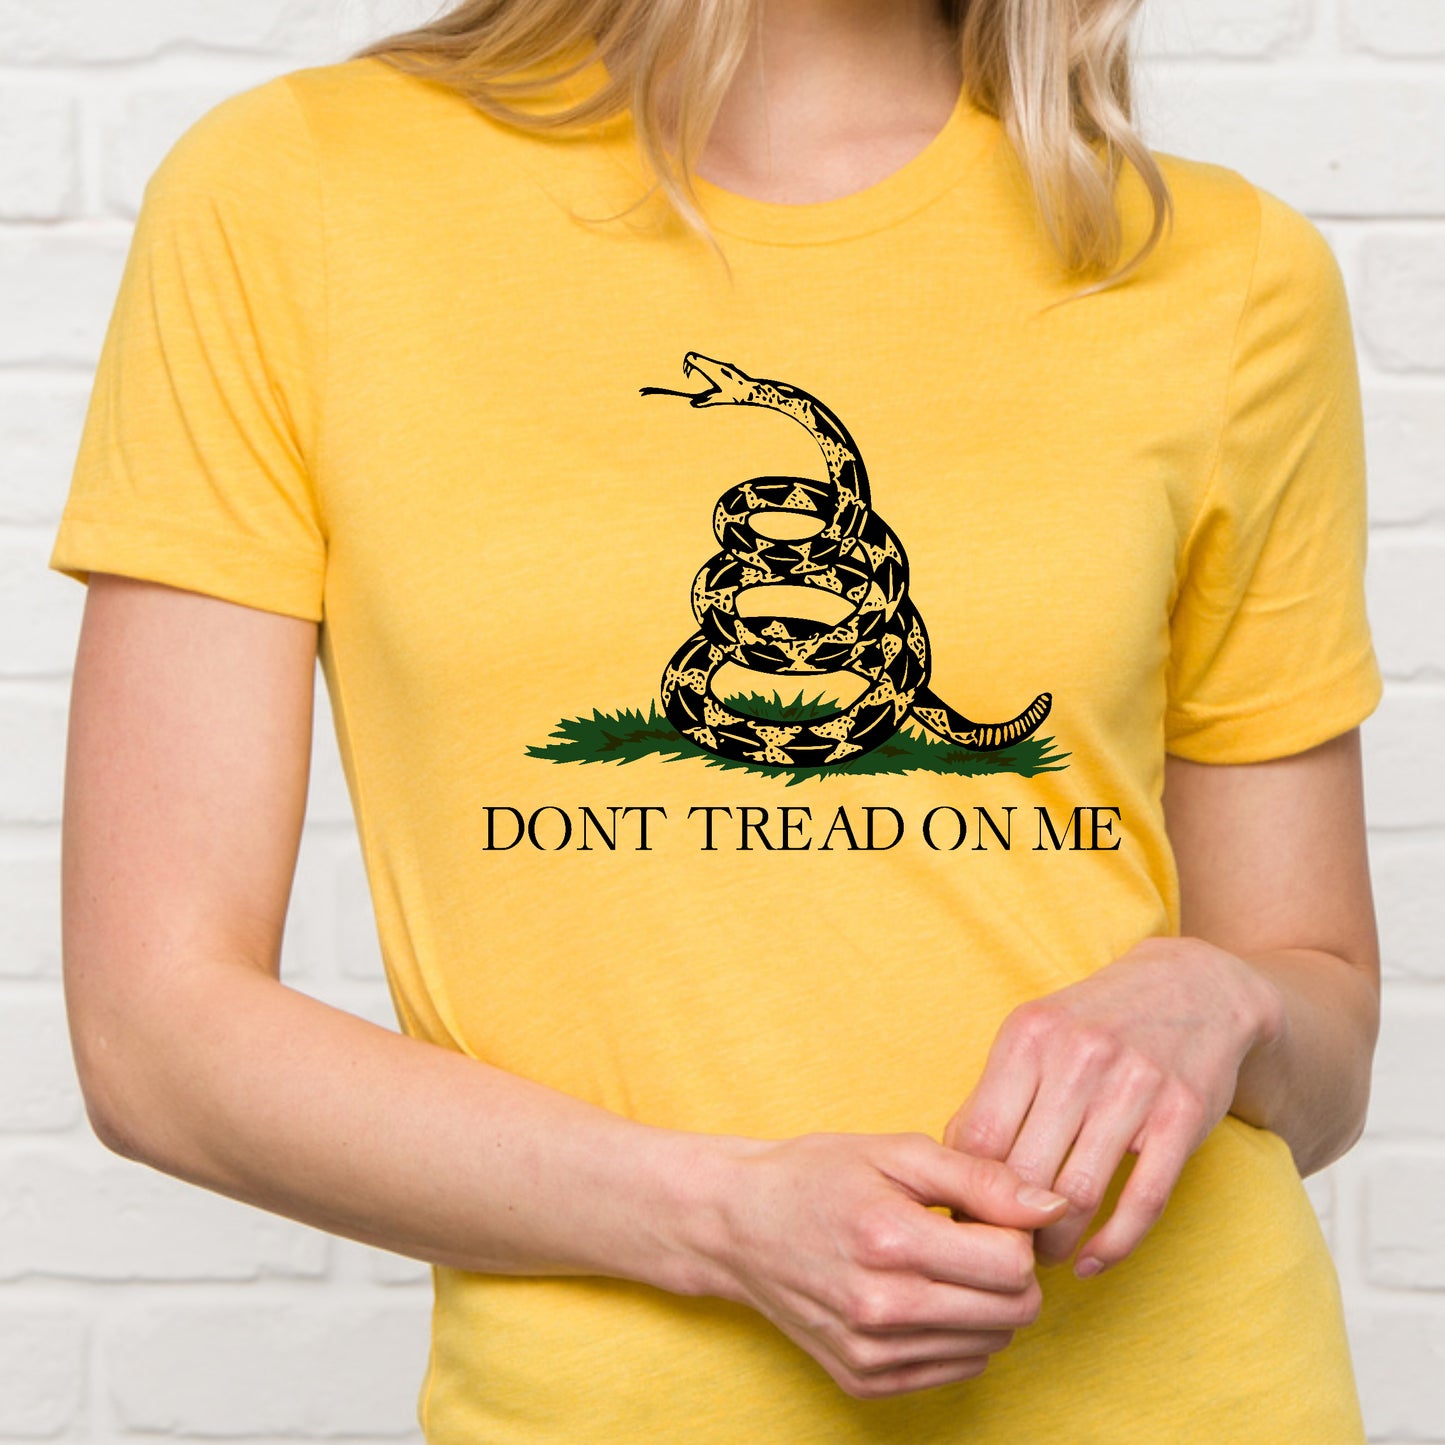 Don't Tread On Me T-Shirt Gadsden Flag TShirt For Historical Freedom T Shirt For Conservative Shirt For American Revolution T-Shirt